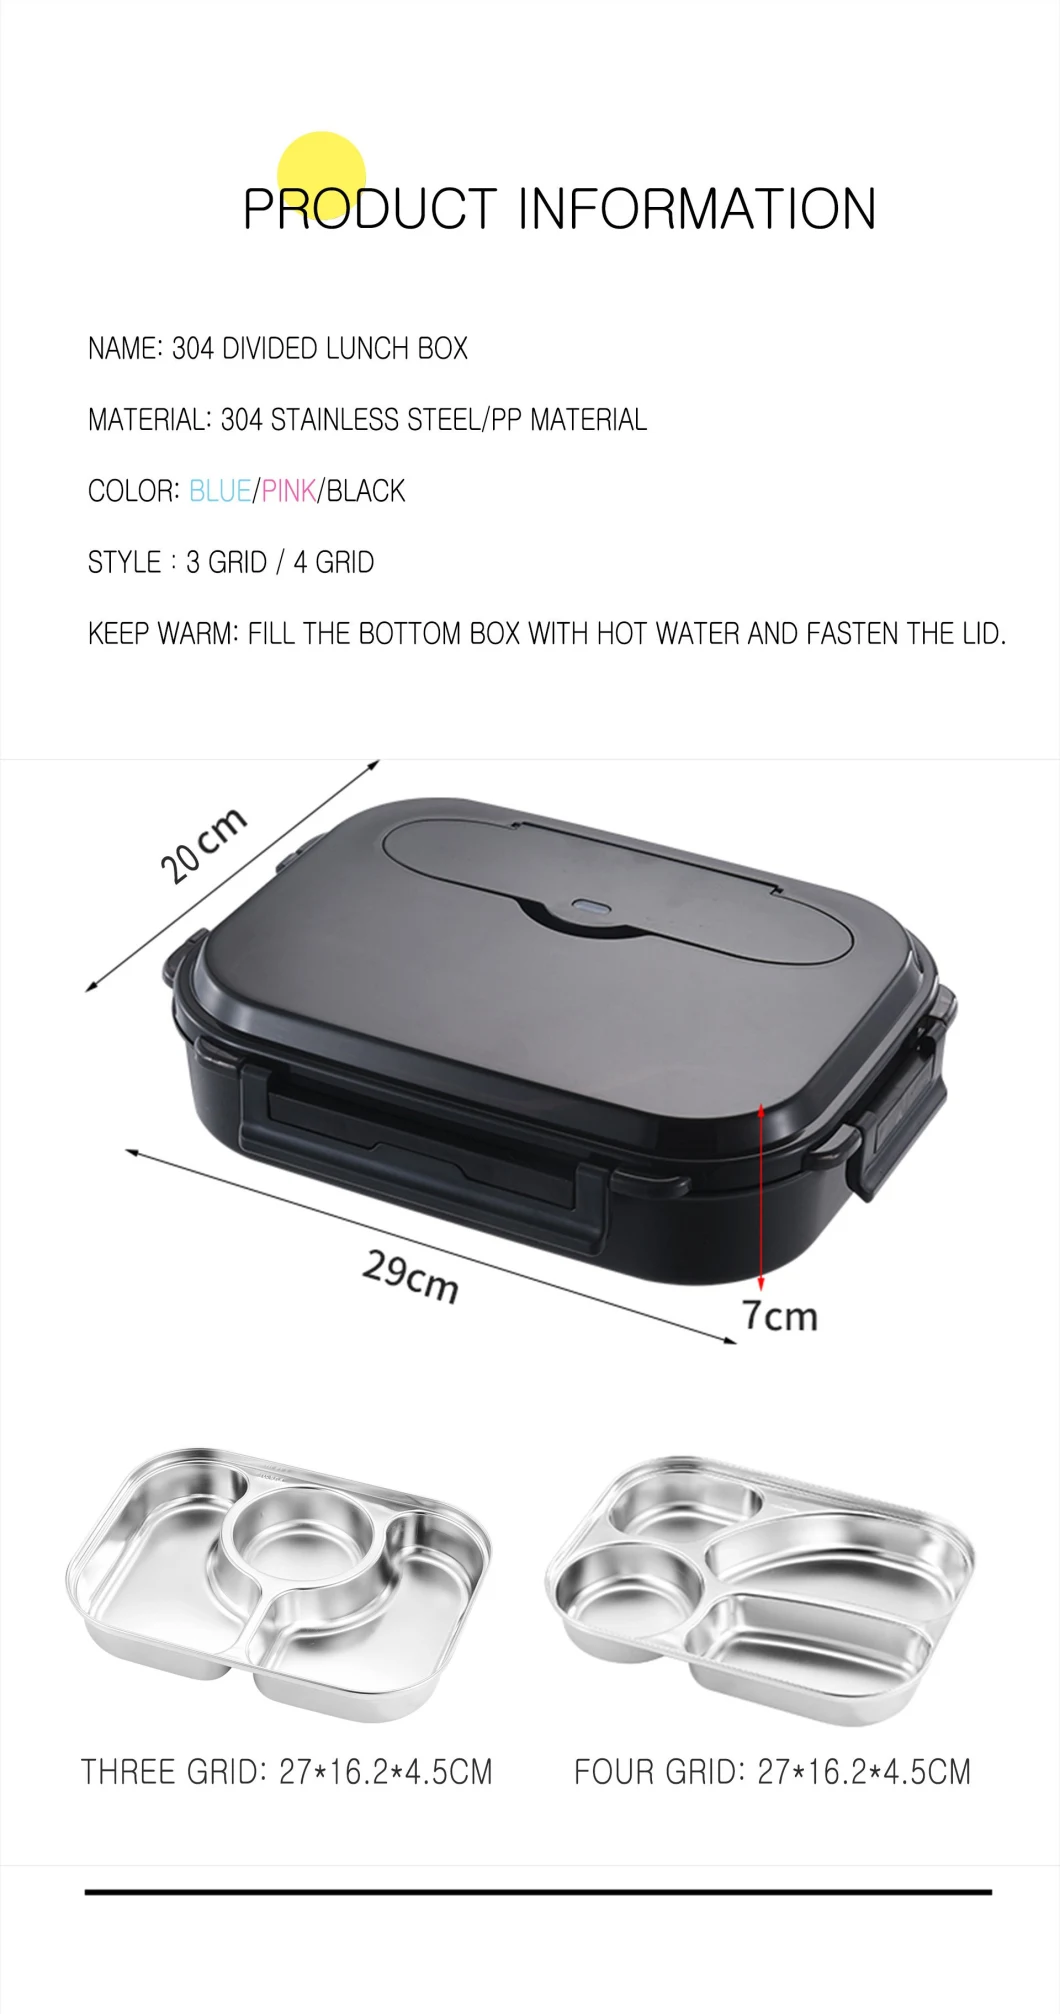 Plastic Reusable Eco Friendly Leakproof 1.6L 3/4 Compartment 304 Stainless Steel Retain Freshness Lunch Bento Box for School/Office/Outdoor/Camping/Hospital